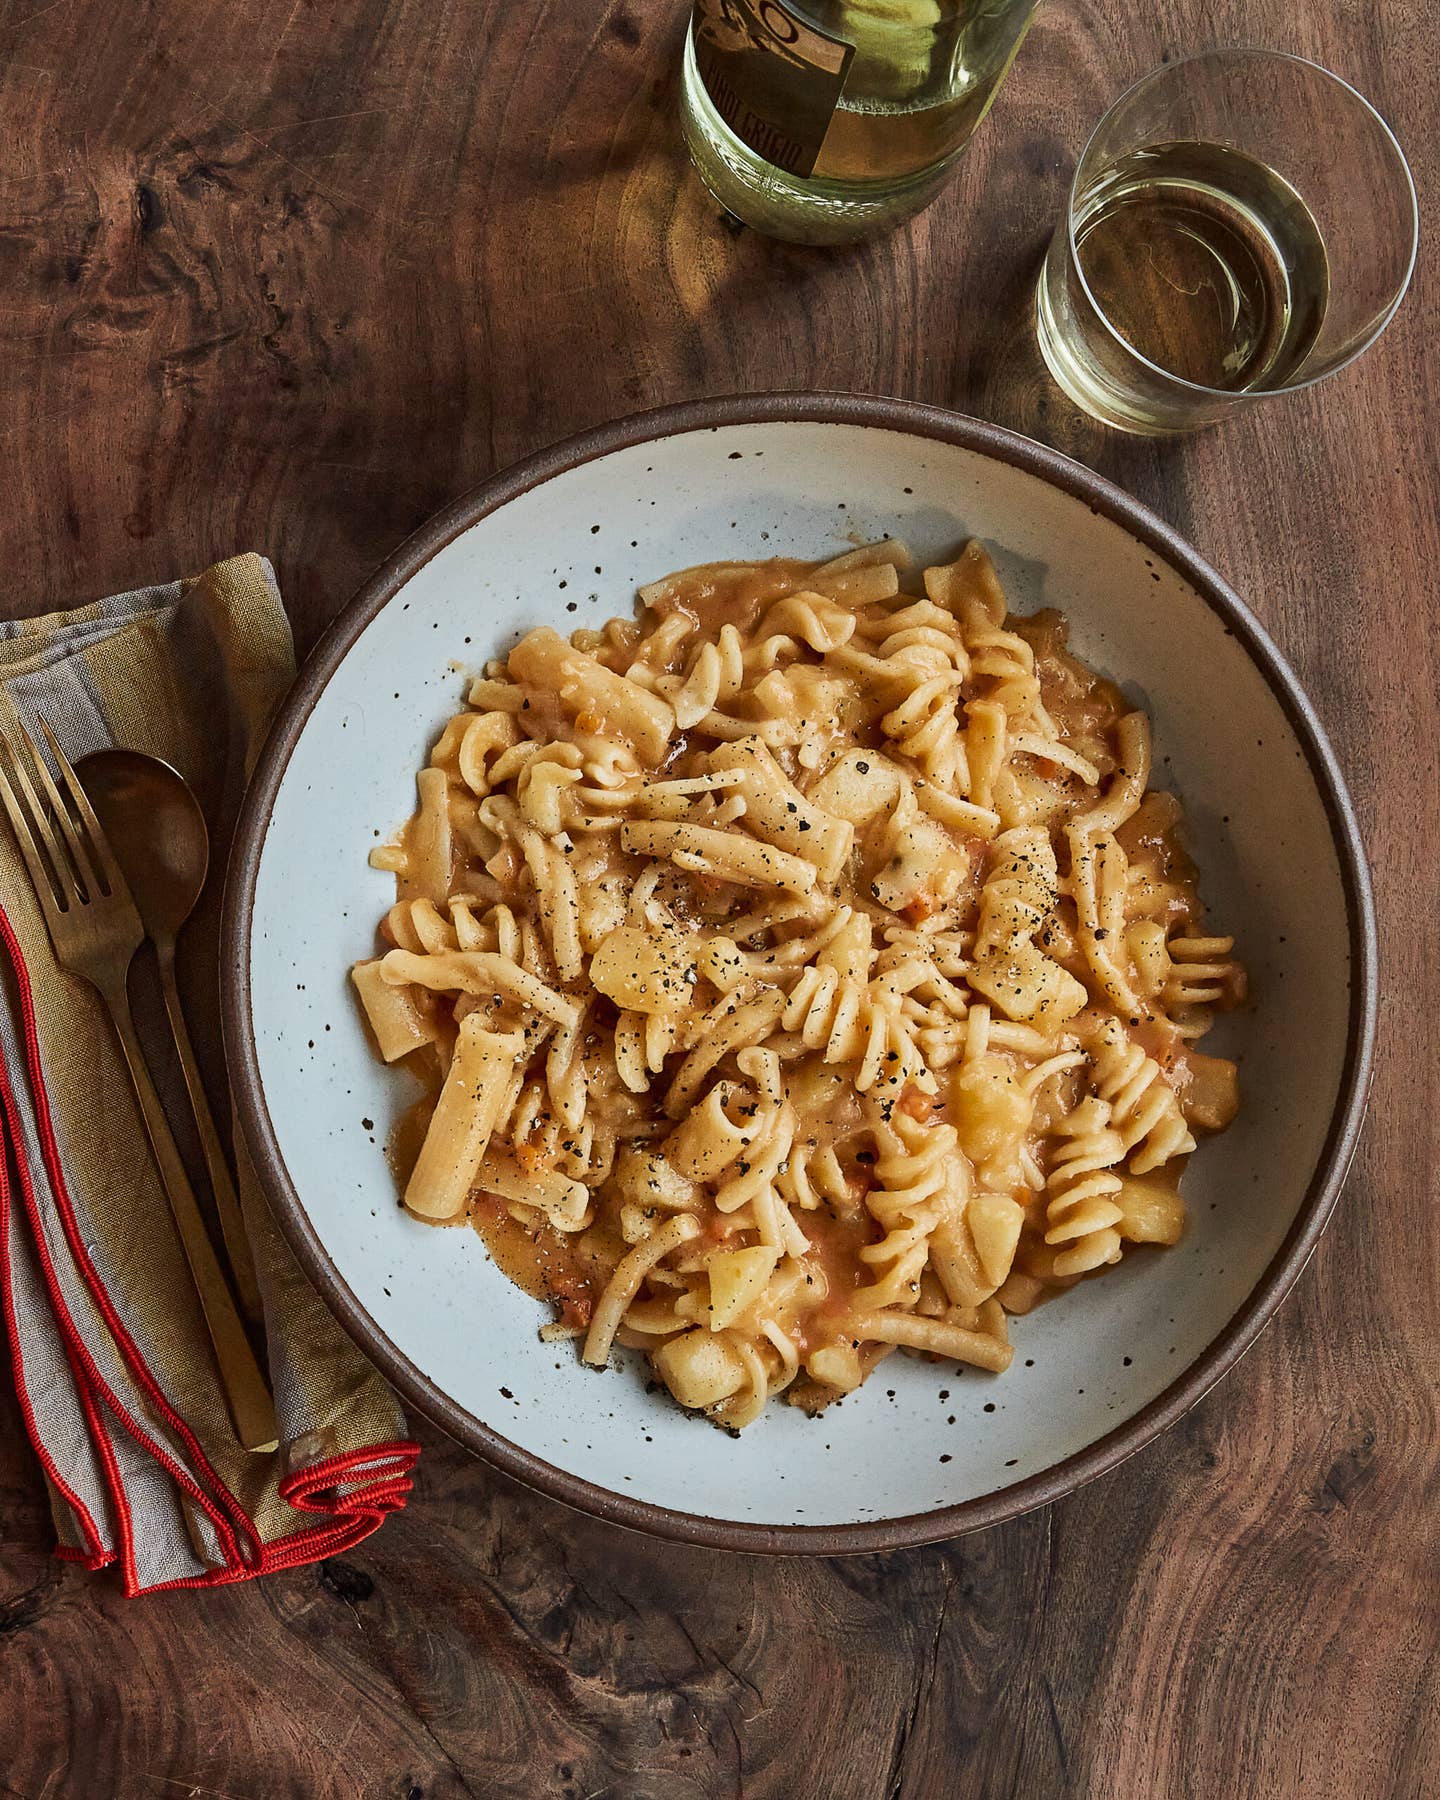 Italy’s Little-Known Trick for Using Up Leftover Dried Pasta